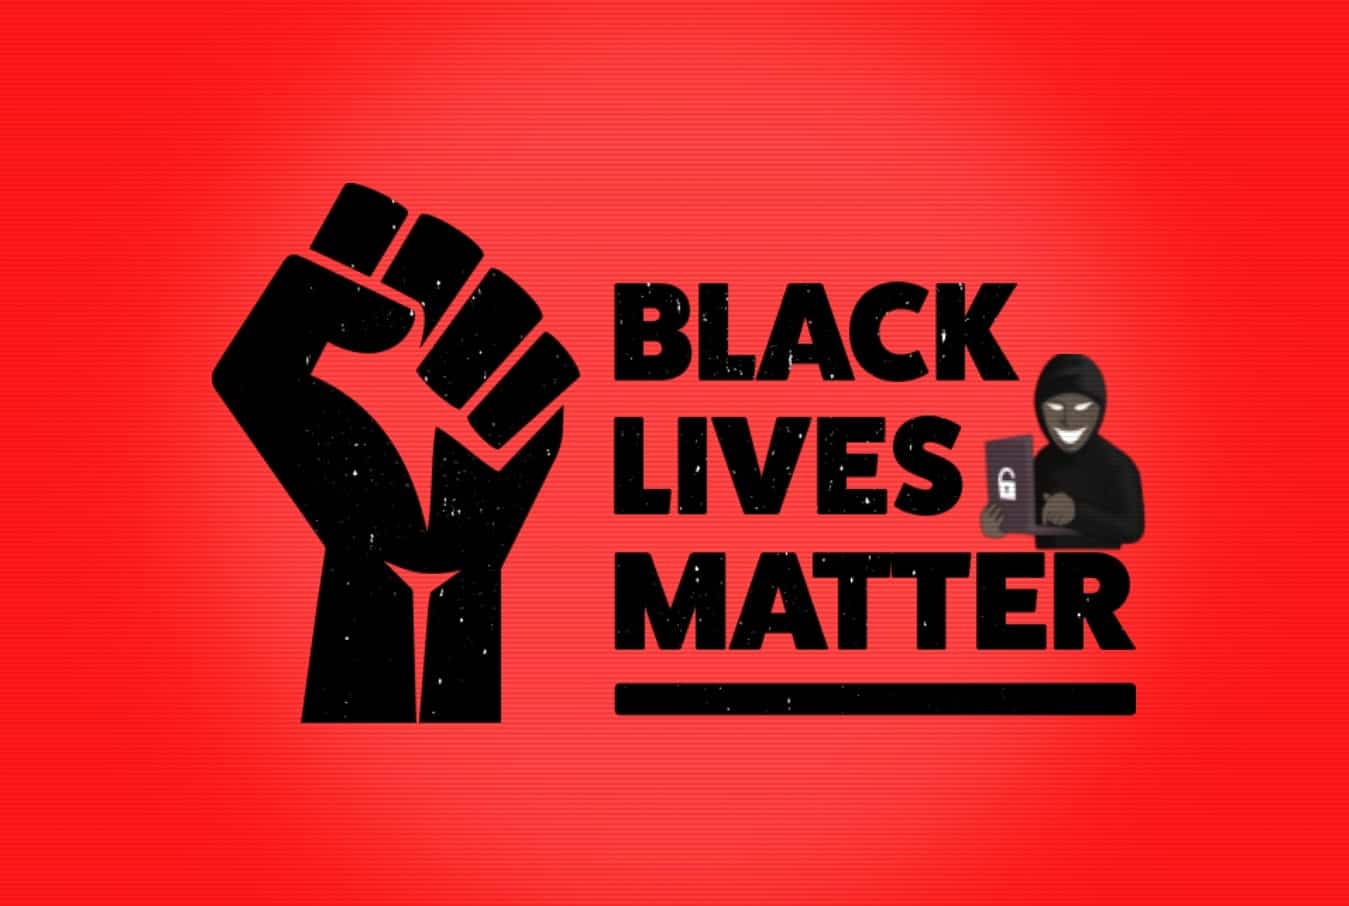 Black Lives Matter movement being exploited to spread Trickbot malware